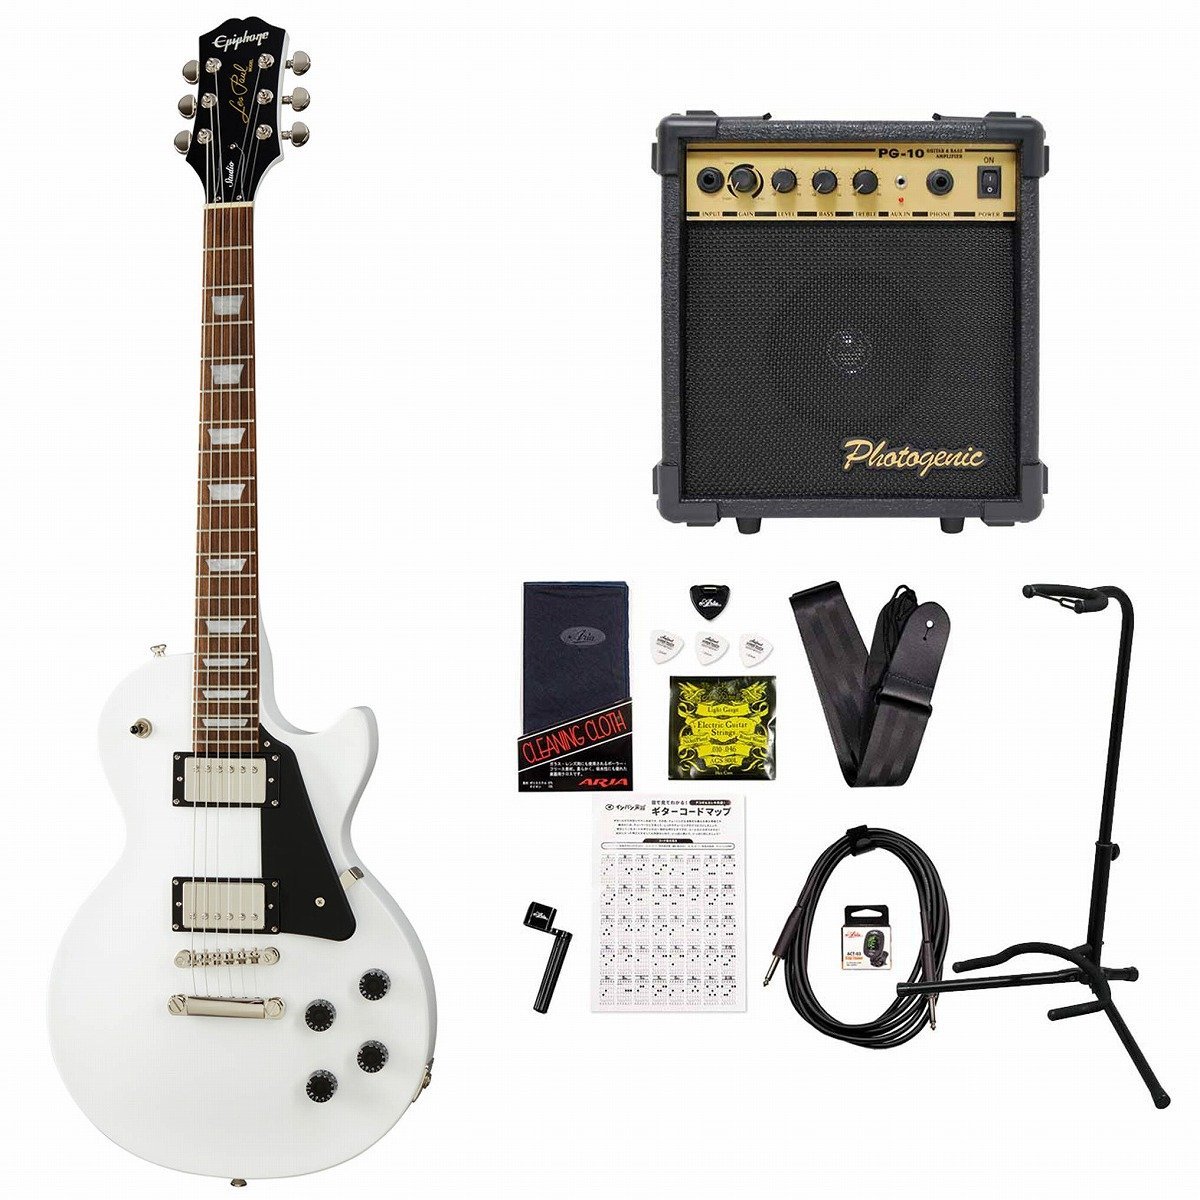 Epiphone inspired by Gibson Les Paul Studio Alpine White ...